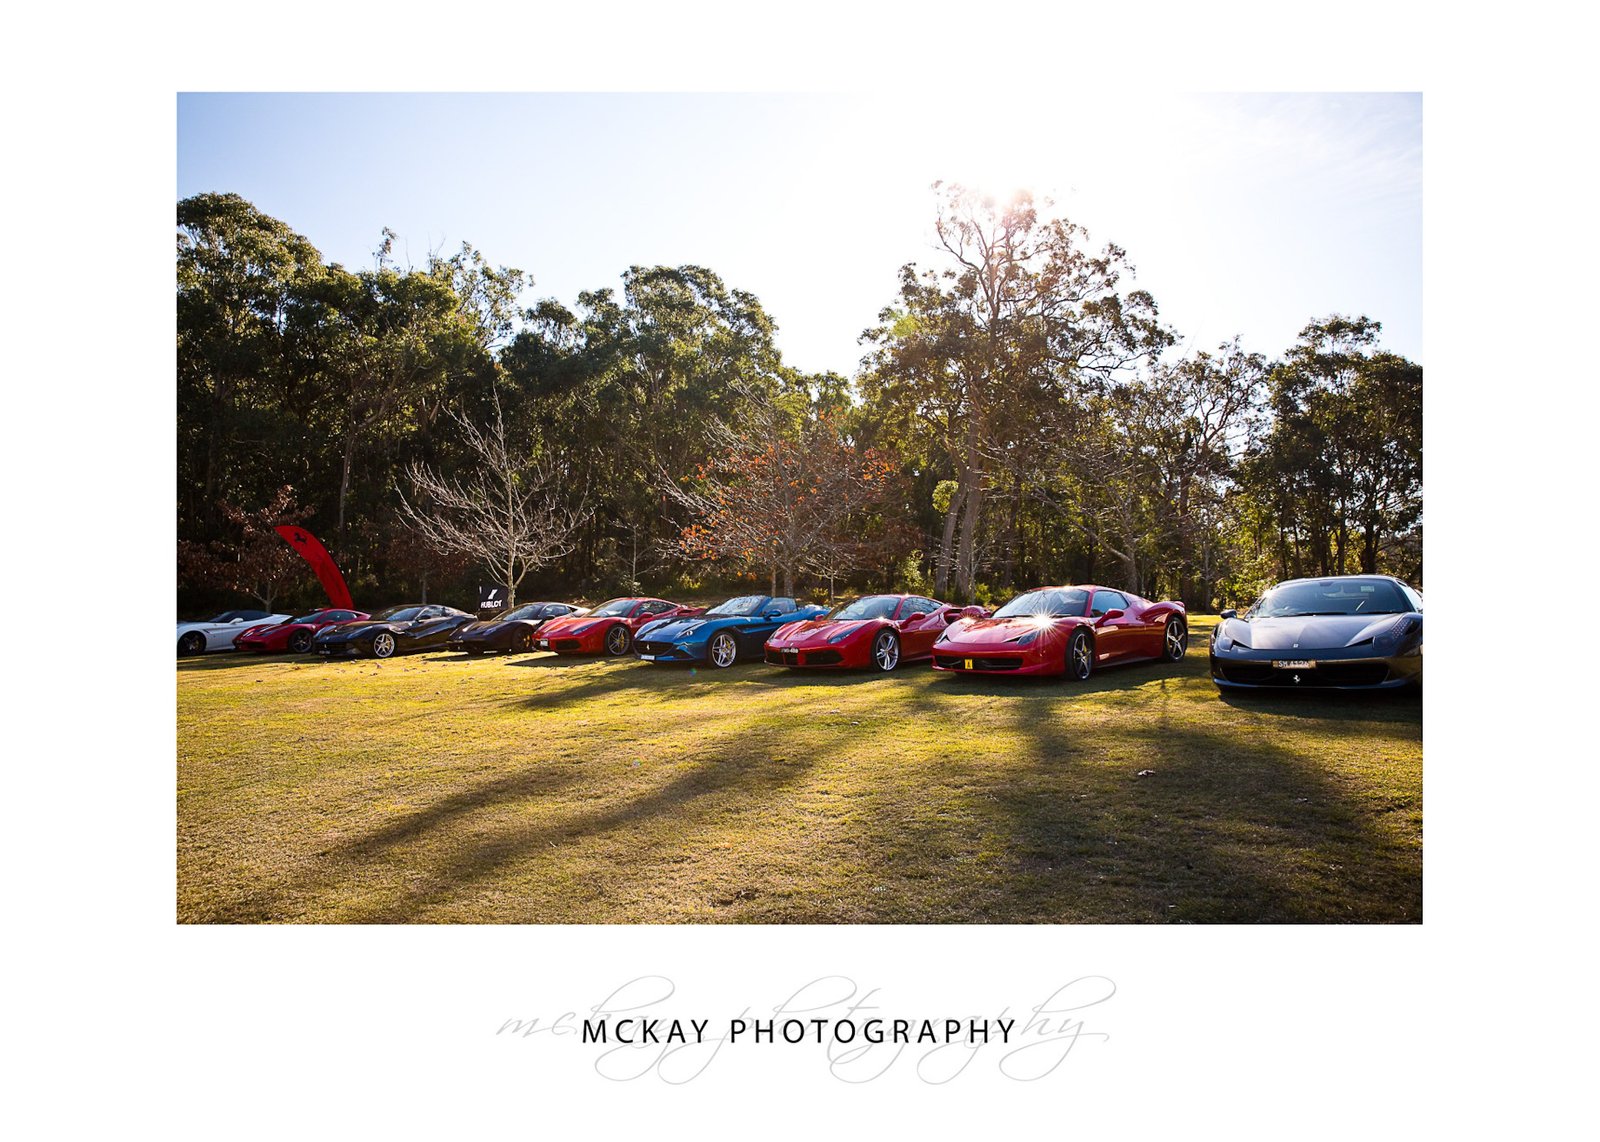 Line up of Ferrari cars - commercial photography Bowral